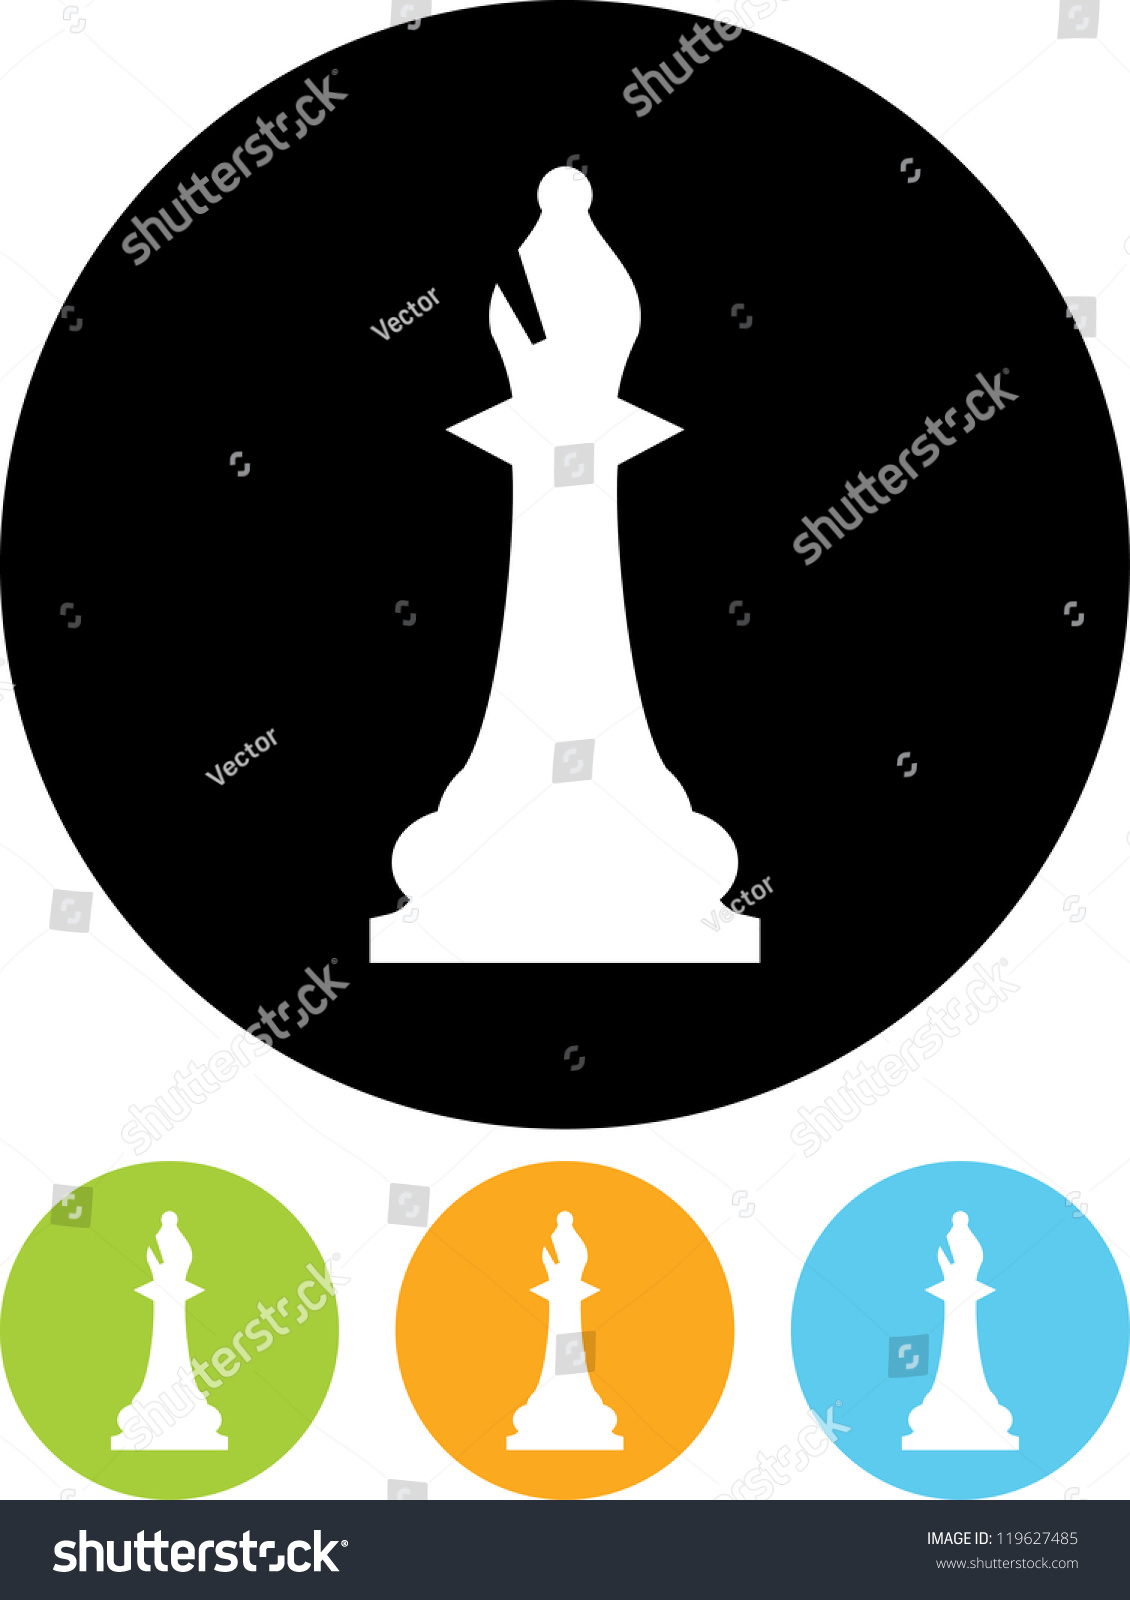 Chess Bishop - Vector Icon Isolated - 119627485 : Shutterstock